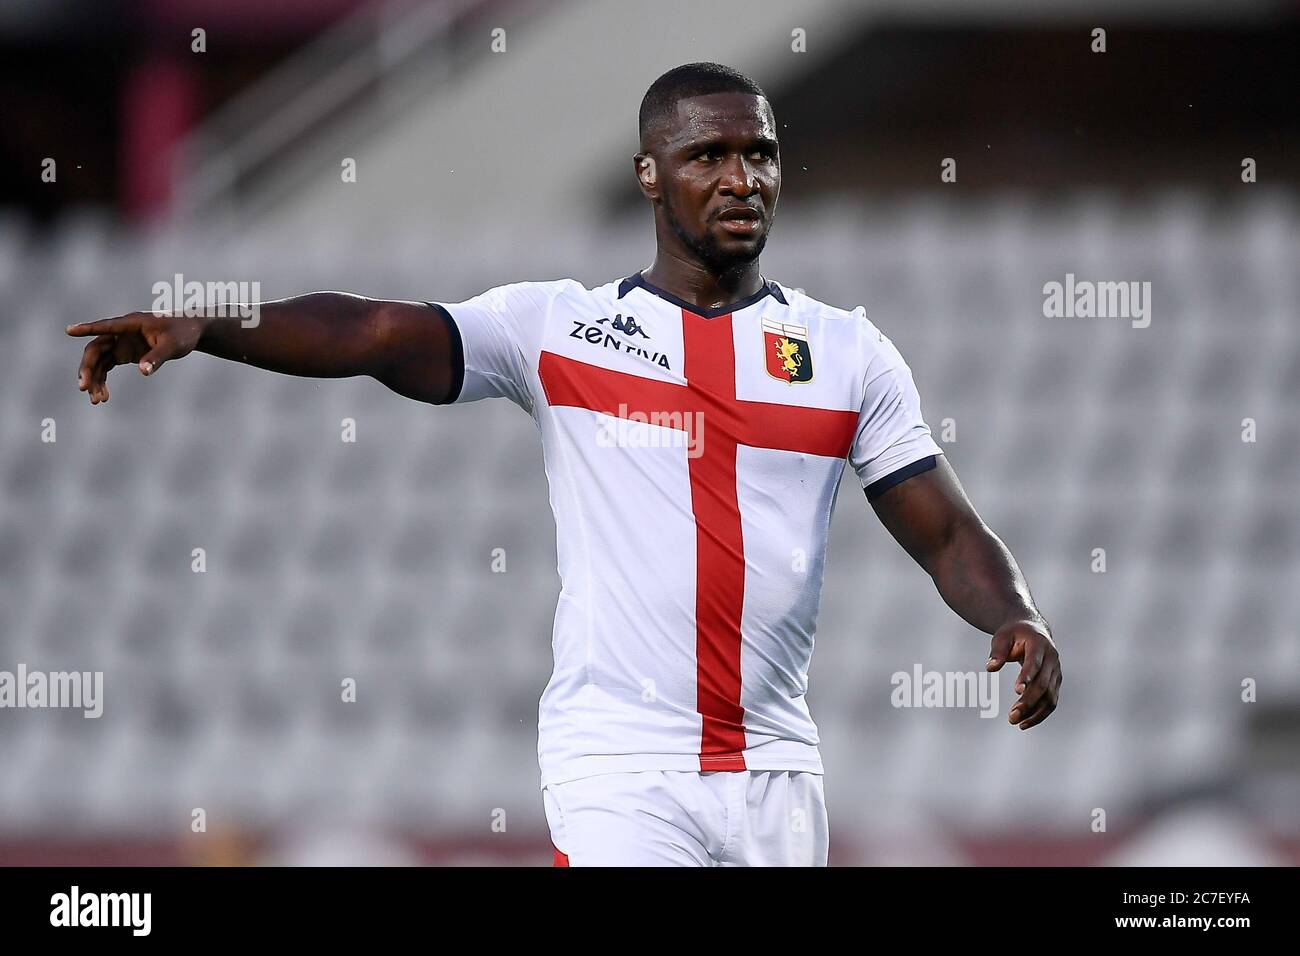 Turin, Italy. 16th July, 2020. TURIN, ITALY - July 16, 2020: Cristian Zapata of Genoa CFC gestures during the Serie A football match between Torino FC and Genoa CFC. Torino FC won 3-0 over Genoa CFC. (Photo by Nicolò Campo/Sipa USA) Credit: Sipa USA/Alamy Live News Stock Photo